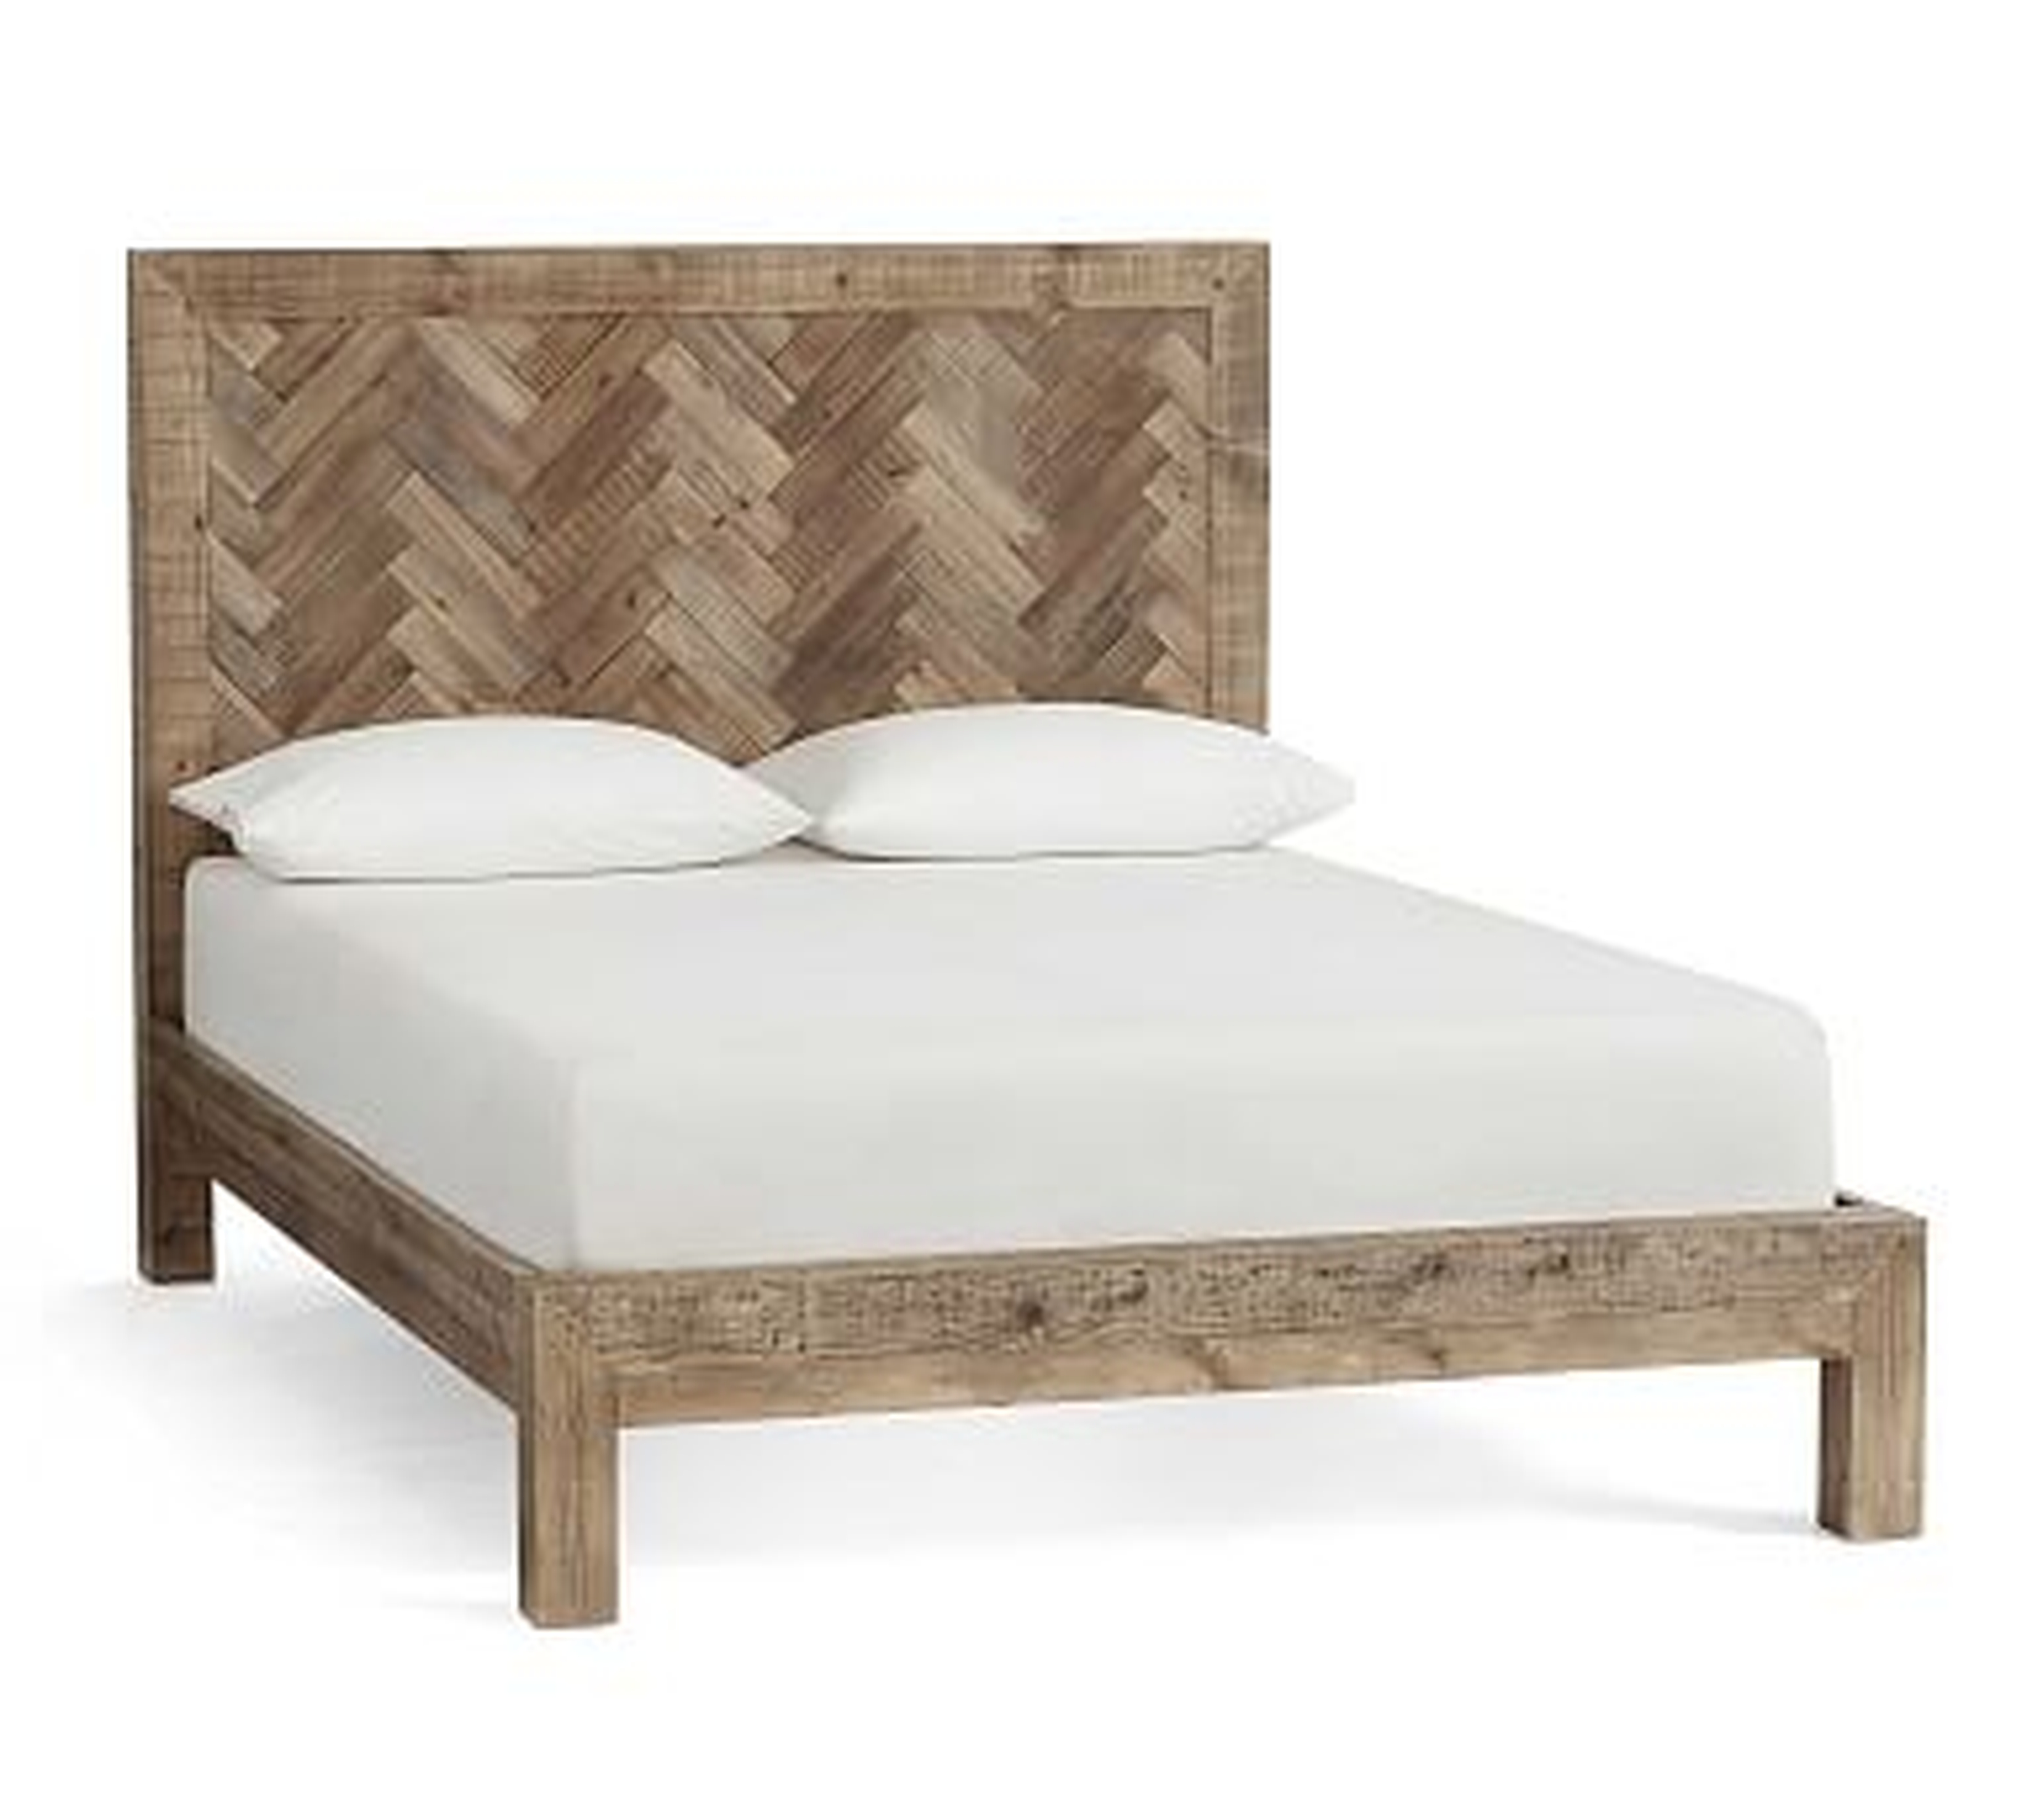 Hensley Reclaimed Wood Platform Bed, Queen, Weathered Gray - Pottery Barn